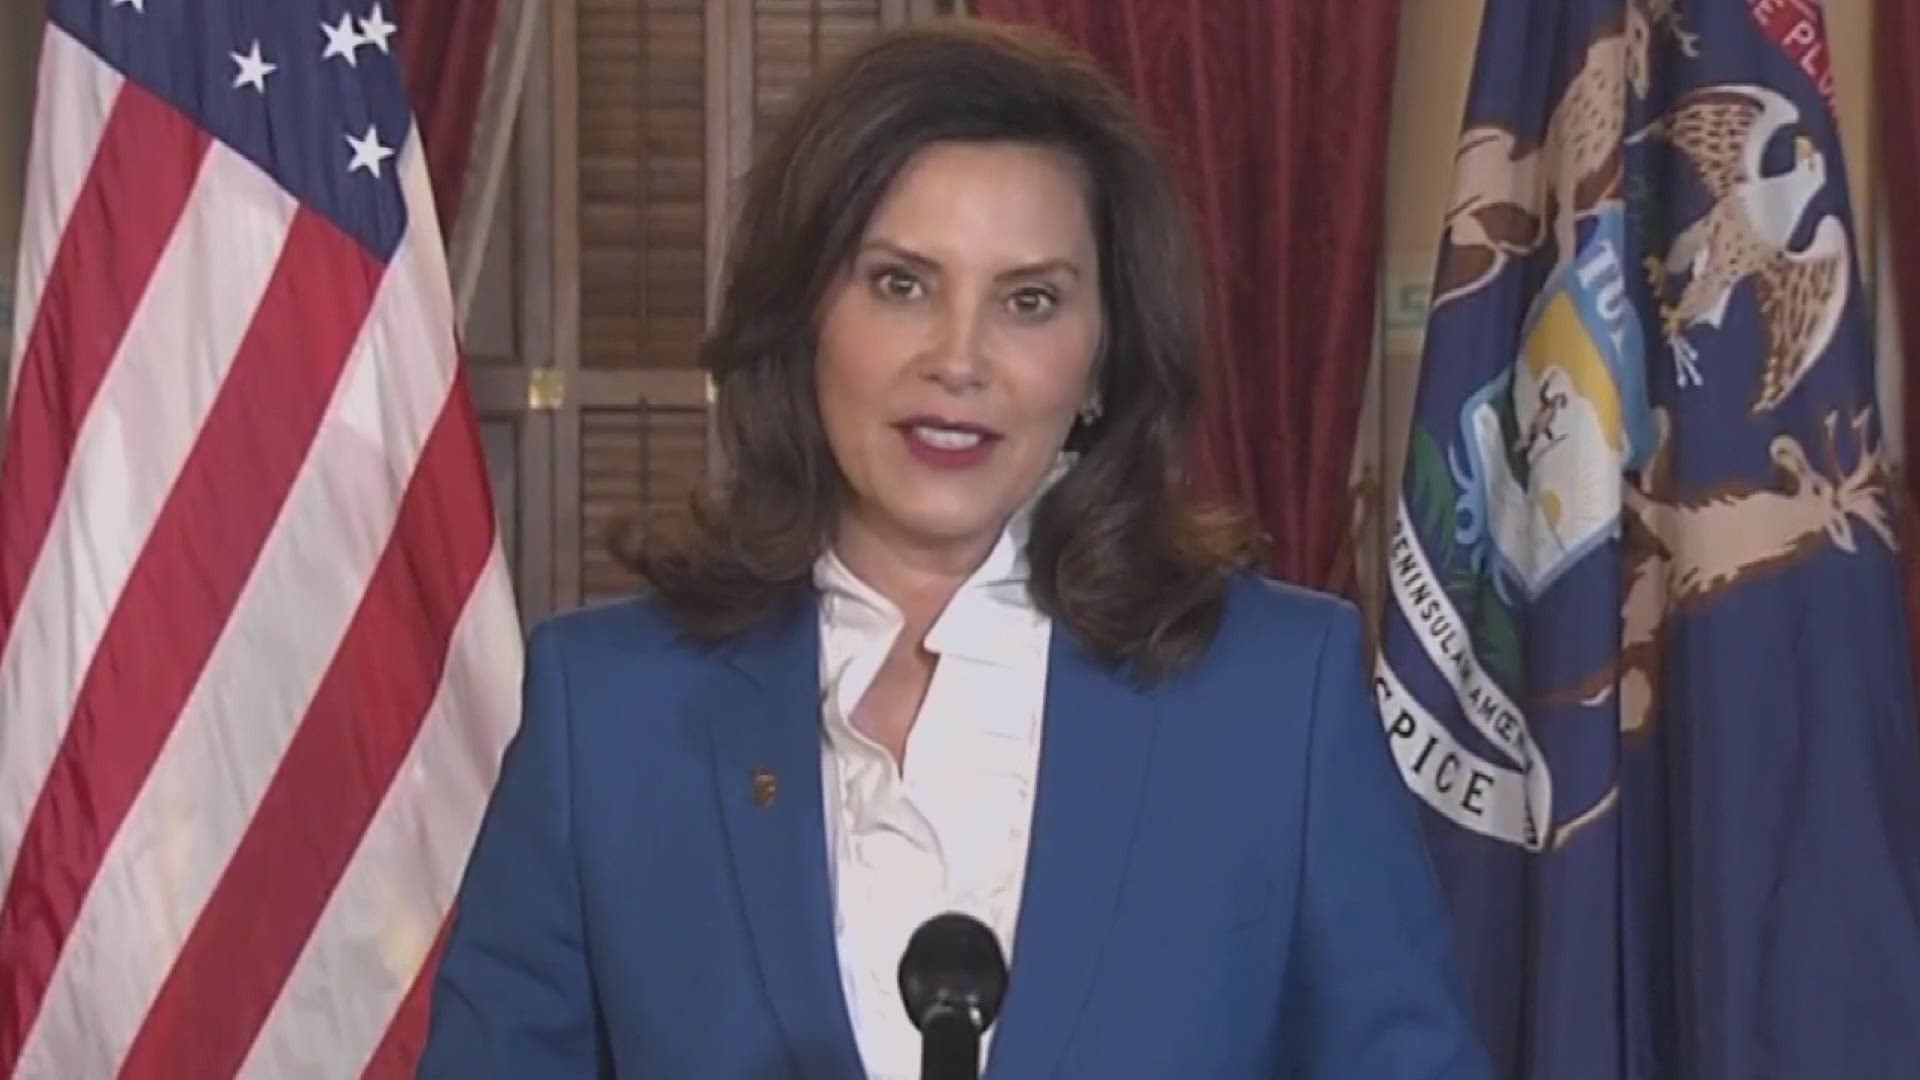 Whitmer is confident that through bipartisan legislation, Michigan can kick start the economy, get COVID-19 vaccines to all who need one and "fix the damn roads."